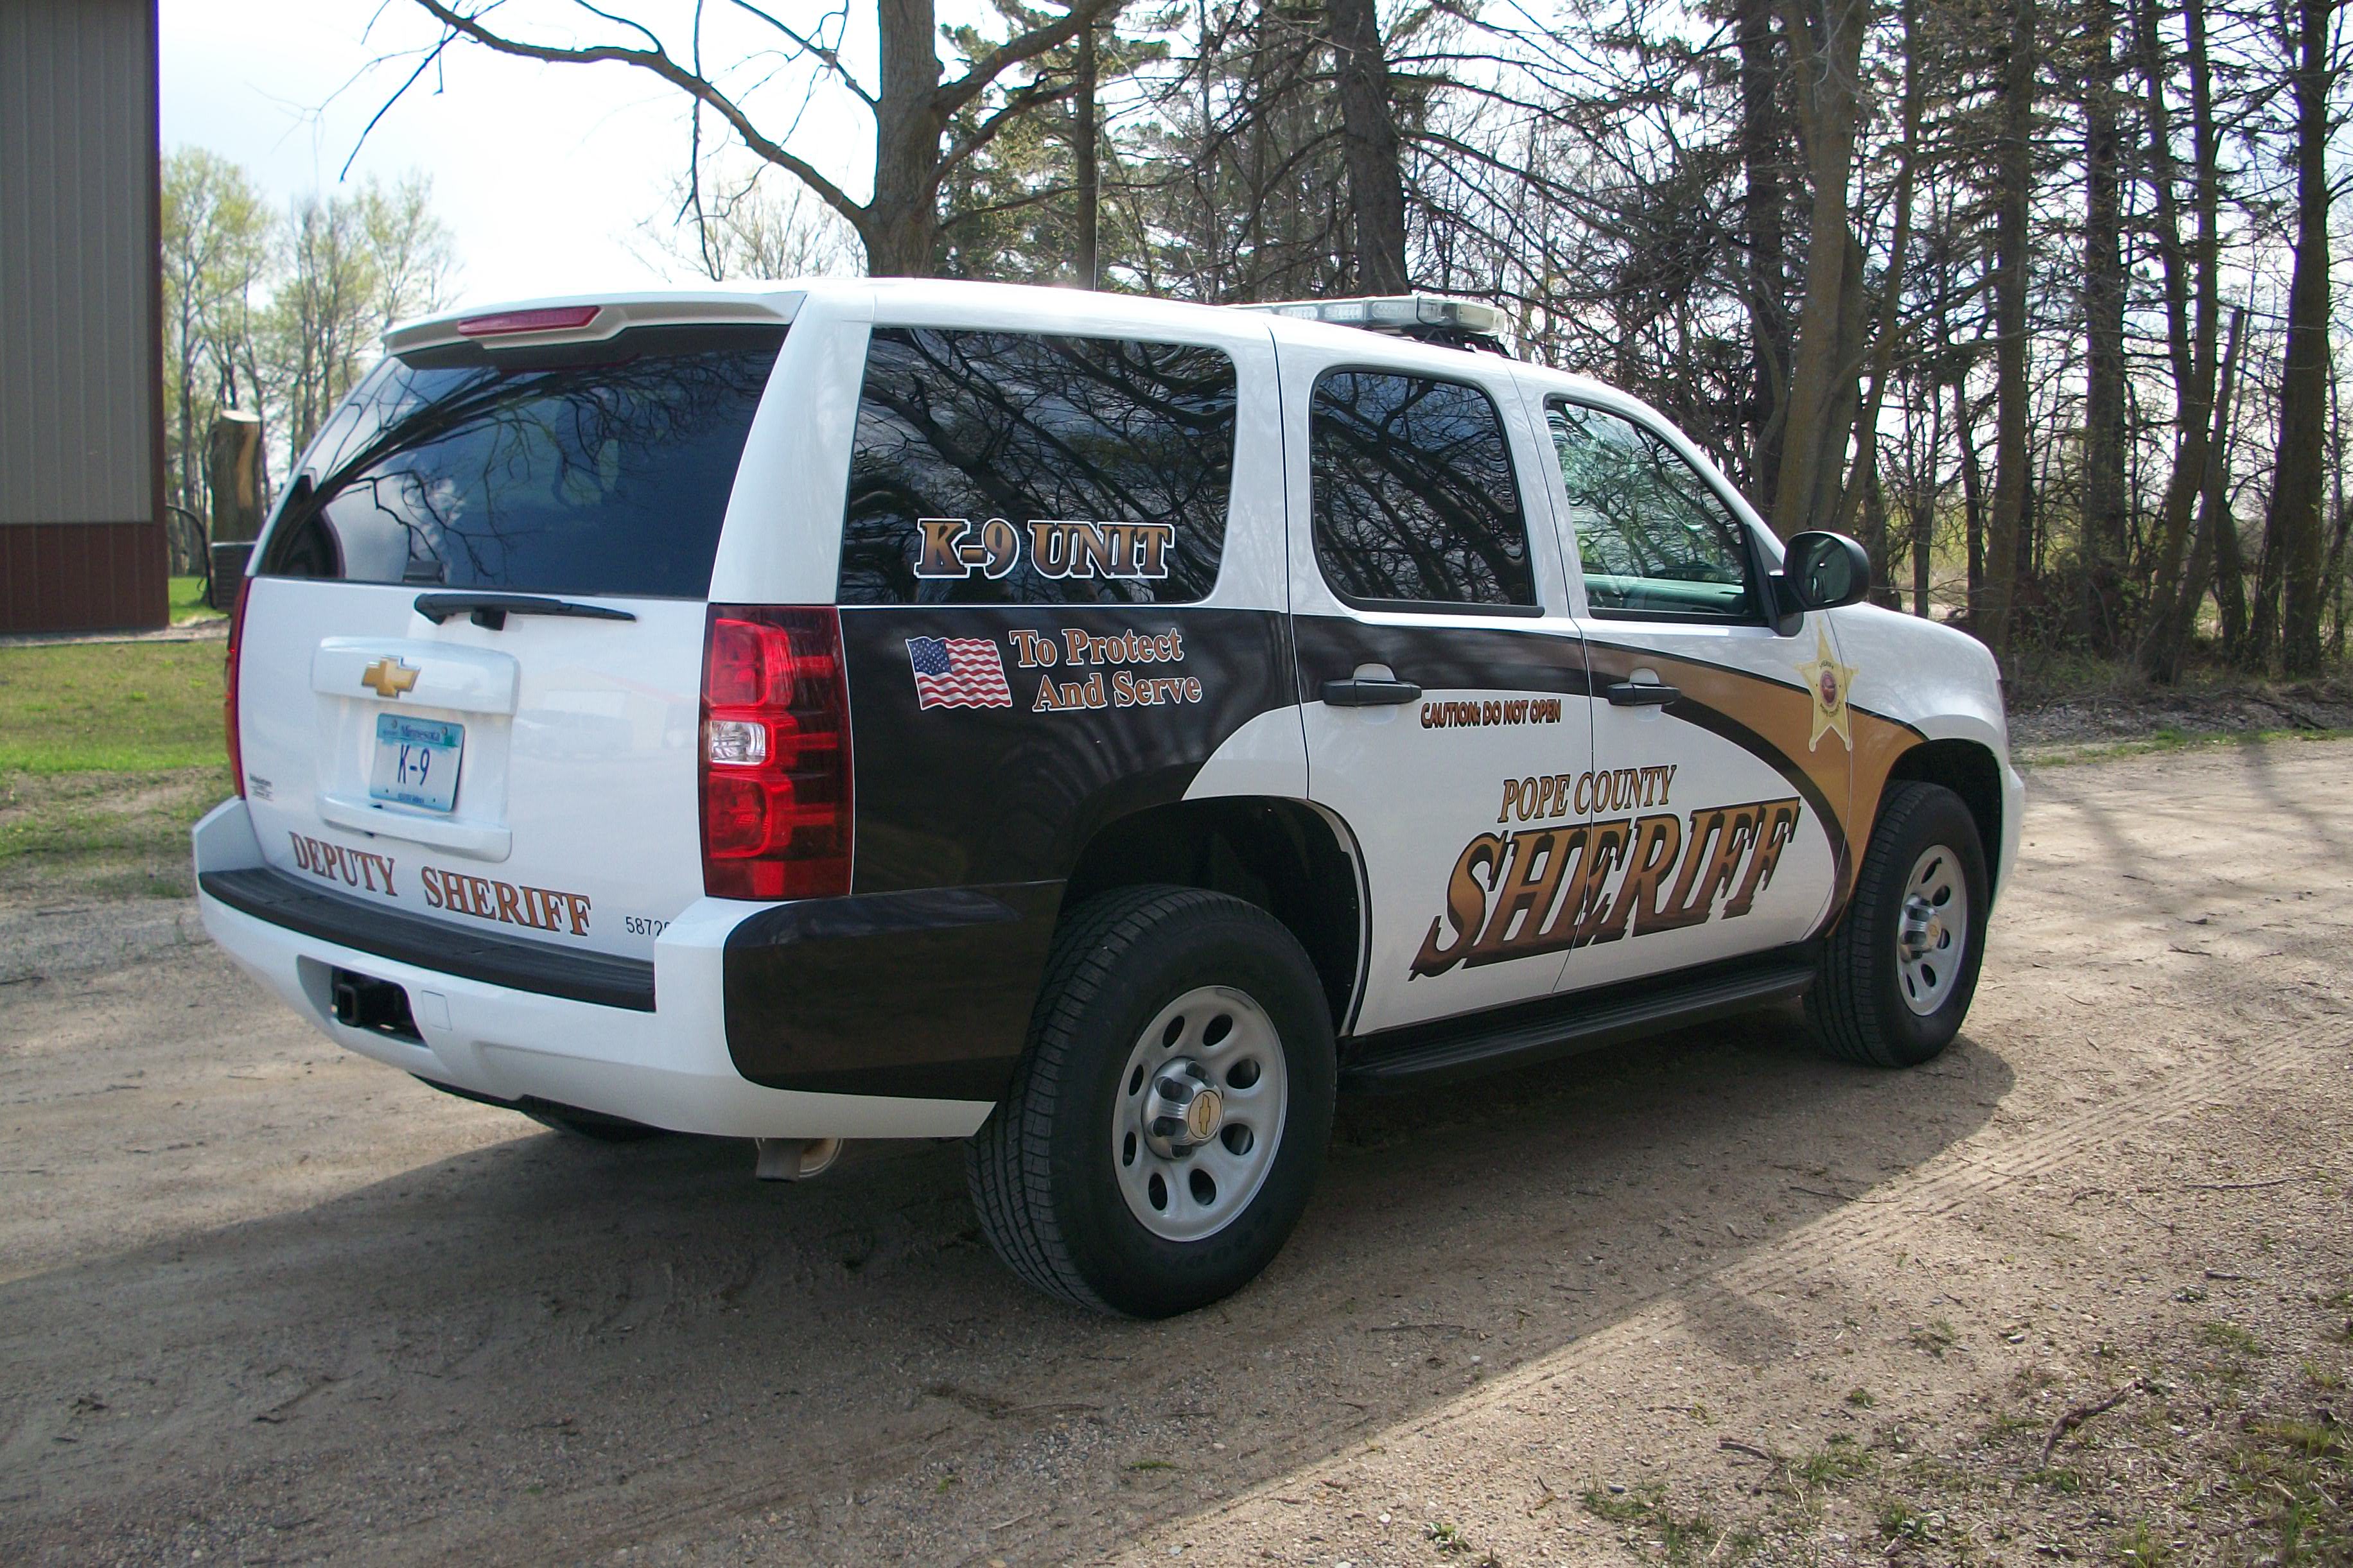 Pope County Sheriff Car